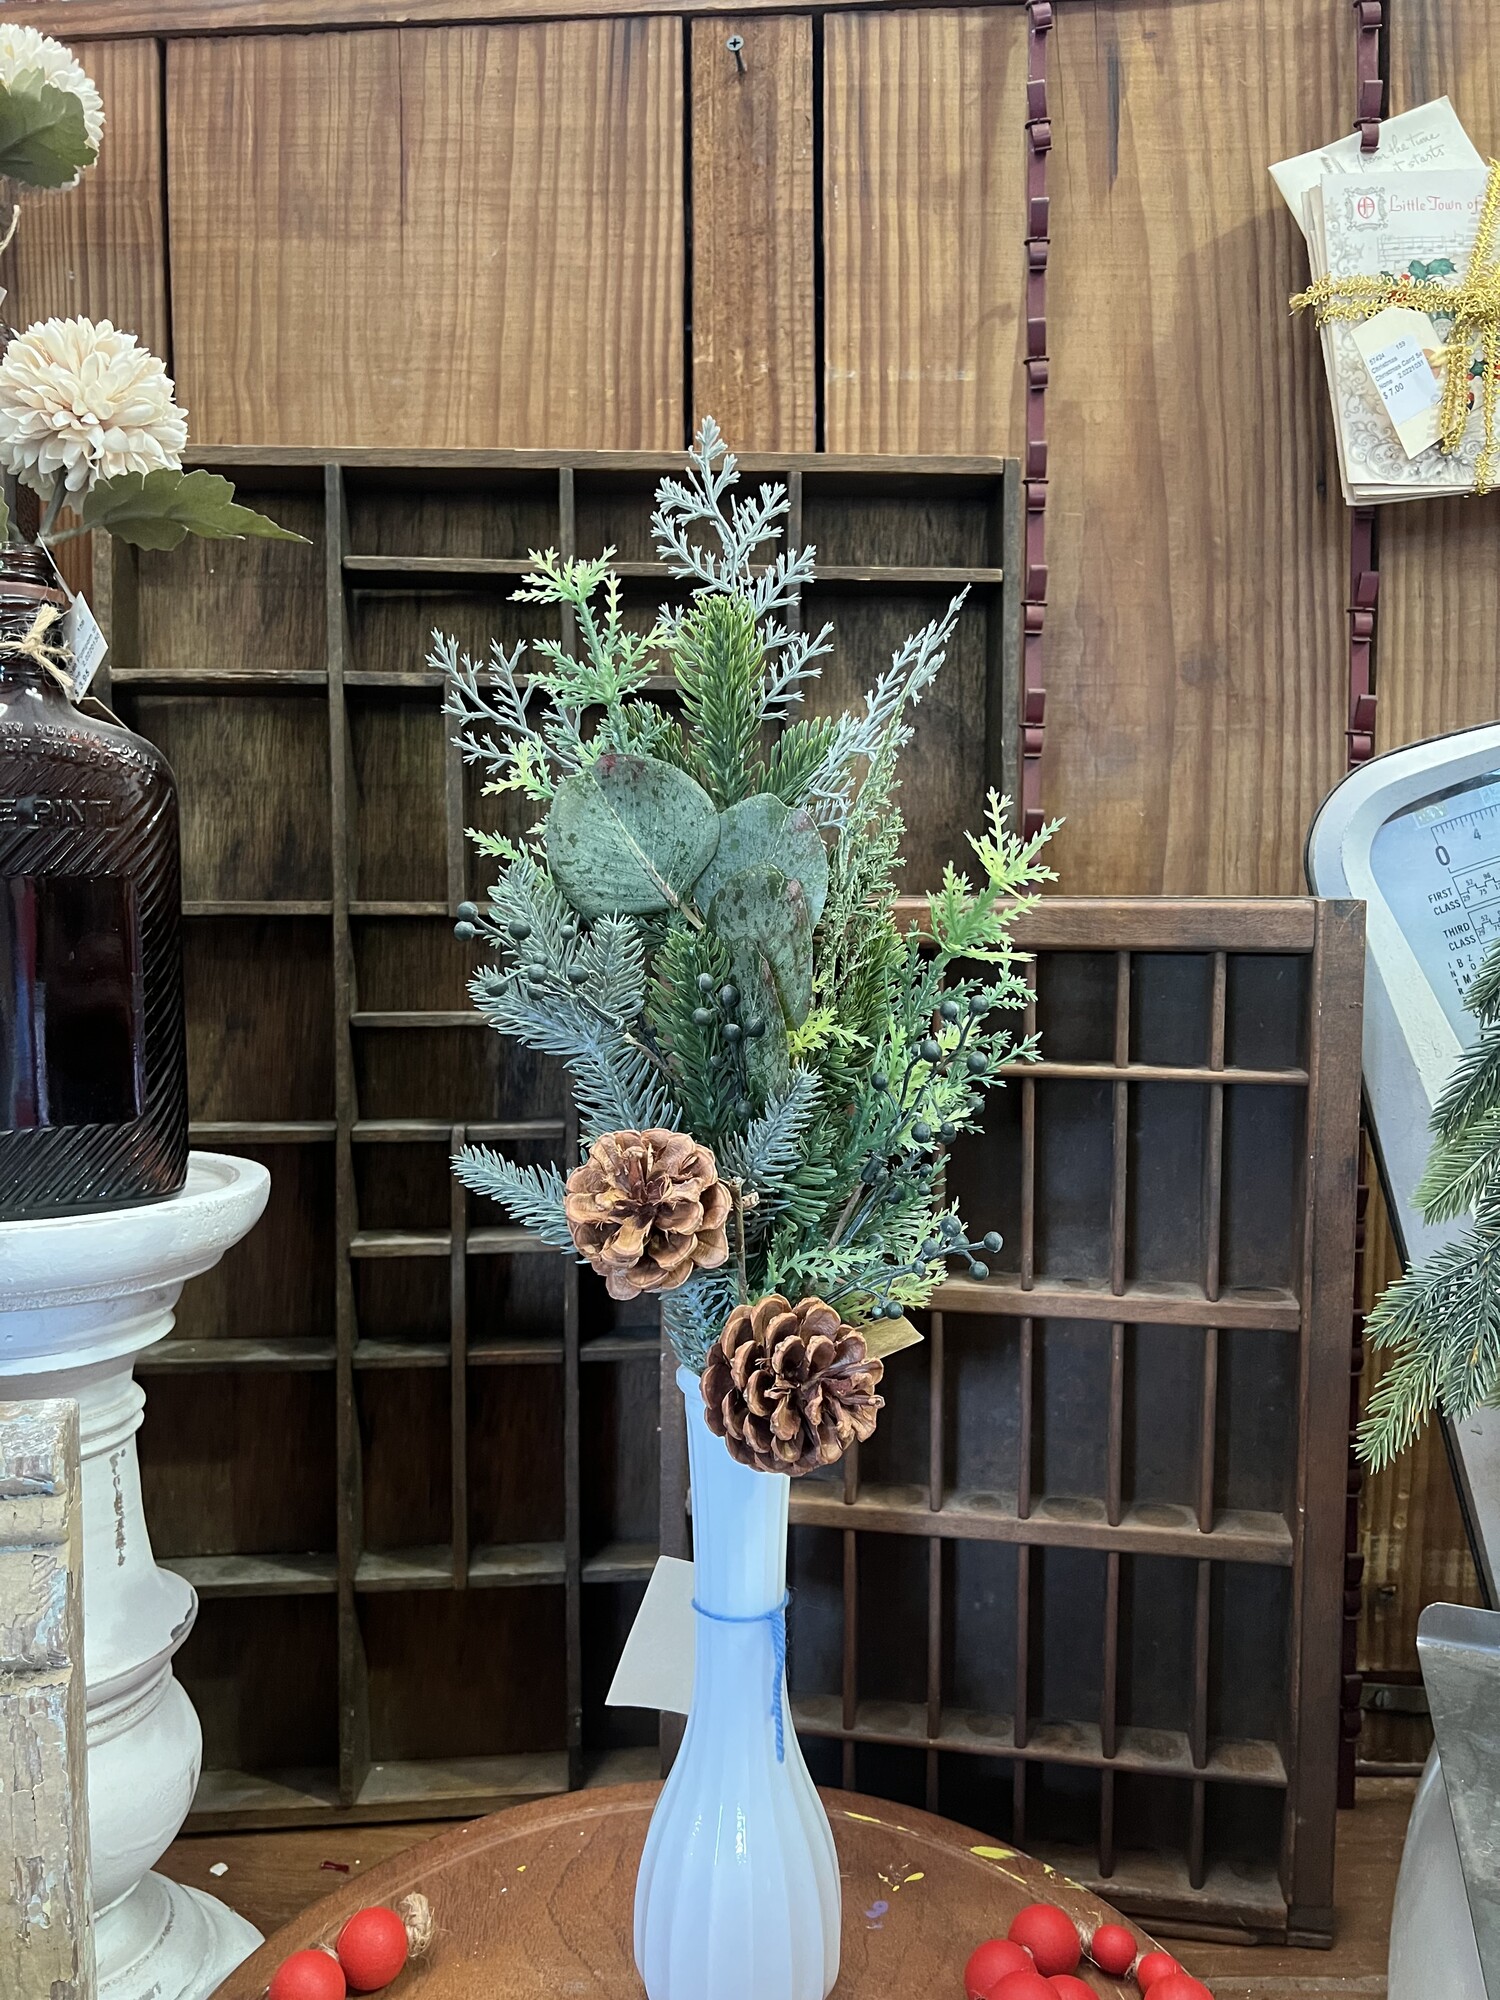 This lovely stem features a nice mixture of seasonal greenery, pine cones and berries. Stem is perfect to just drop in a vase for a wintery feel. Stem measures 20 inches tall